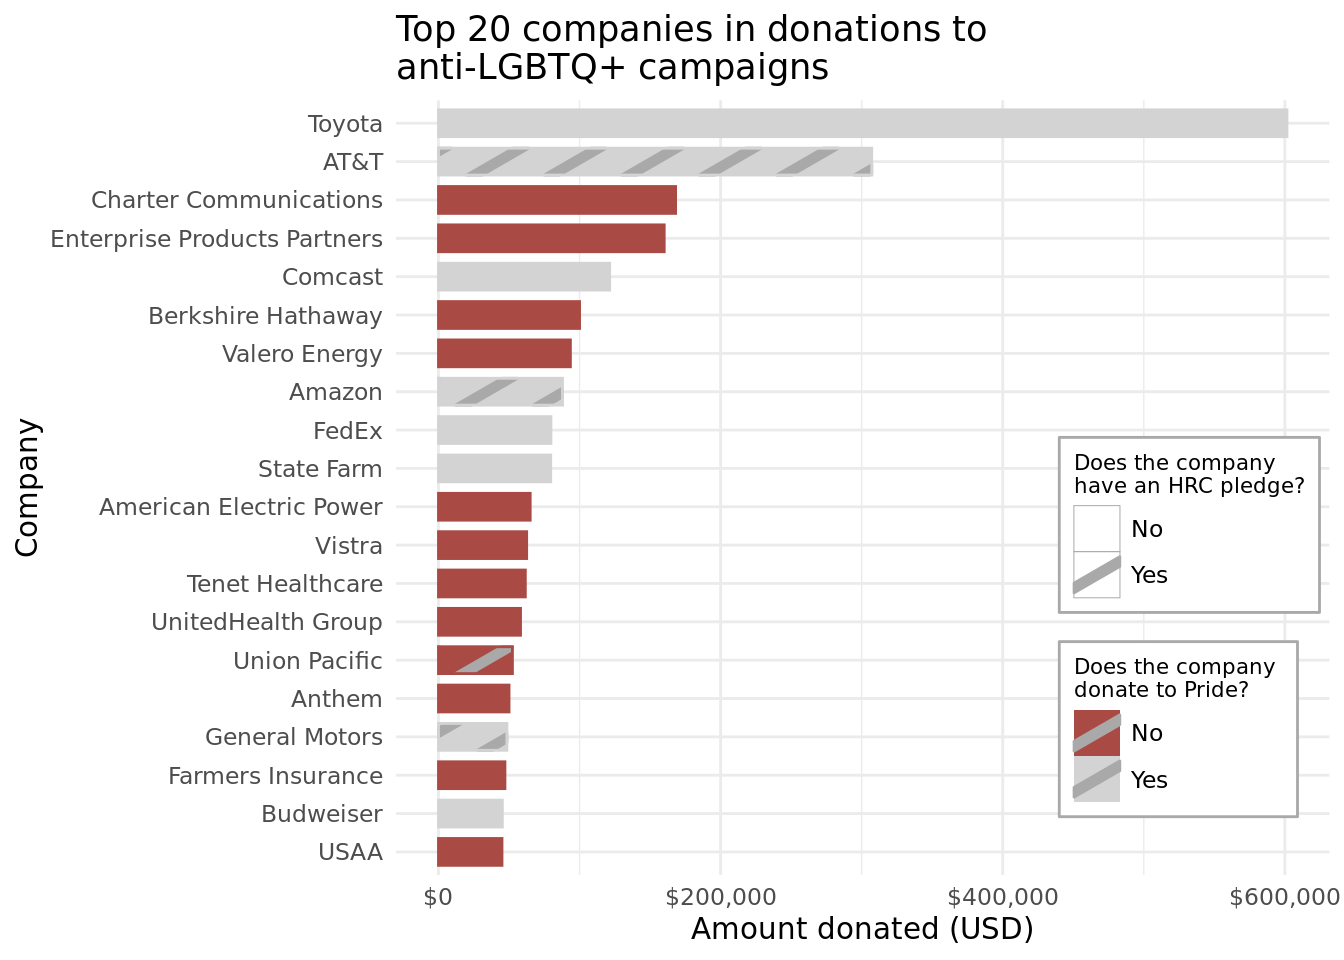 Top 20 companies in donations to anti-LGBTQ+ campaigns.